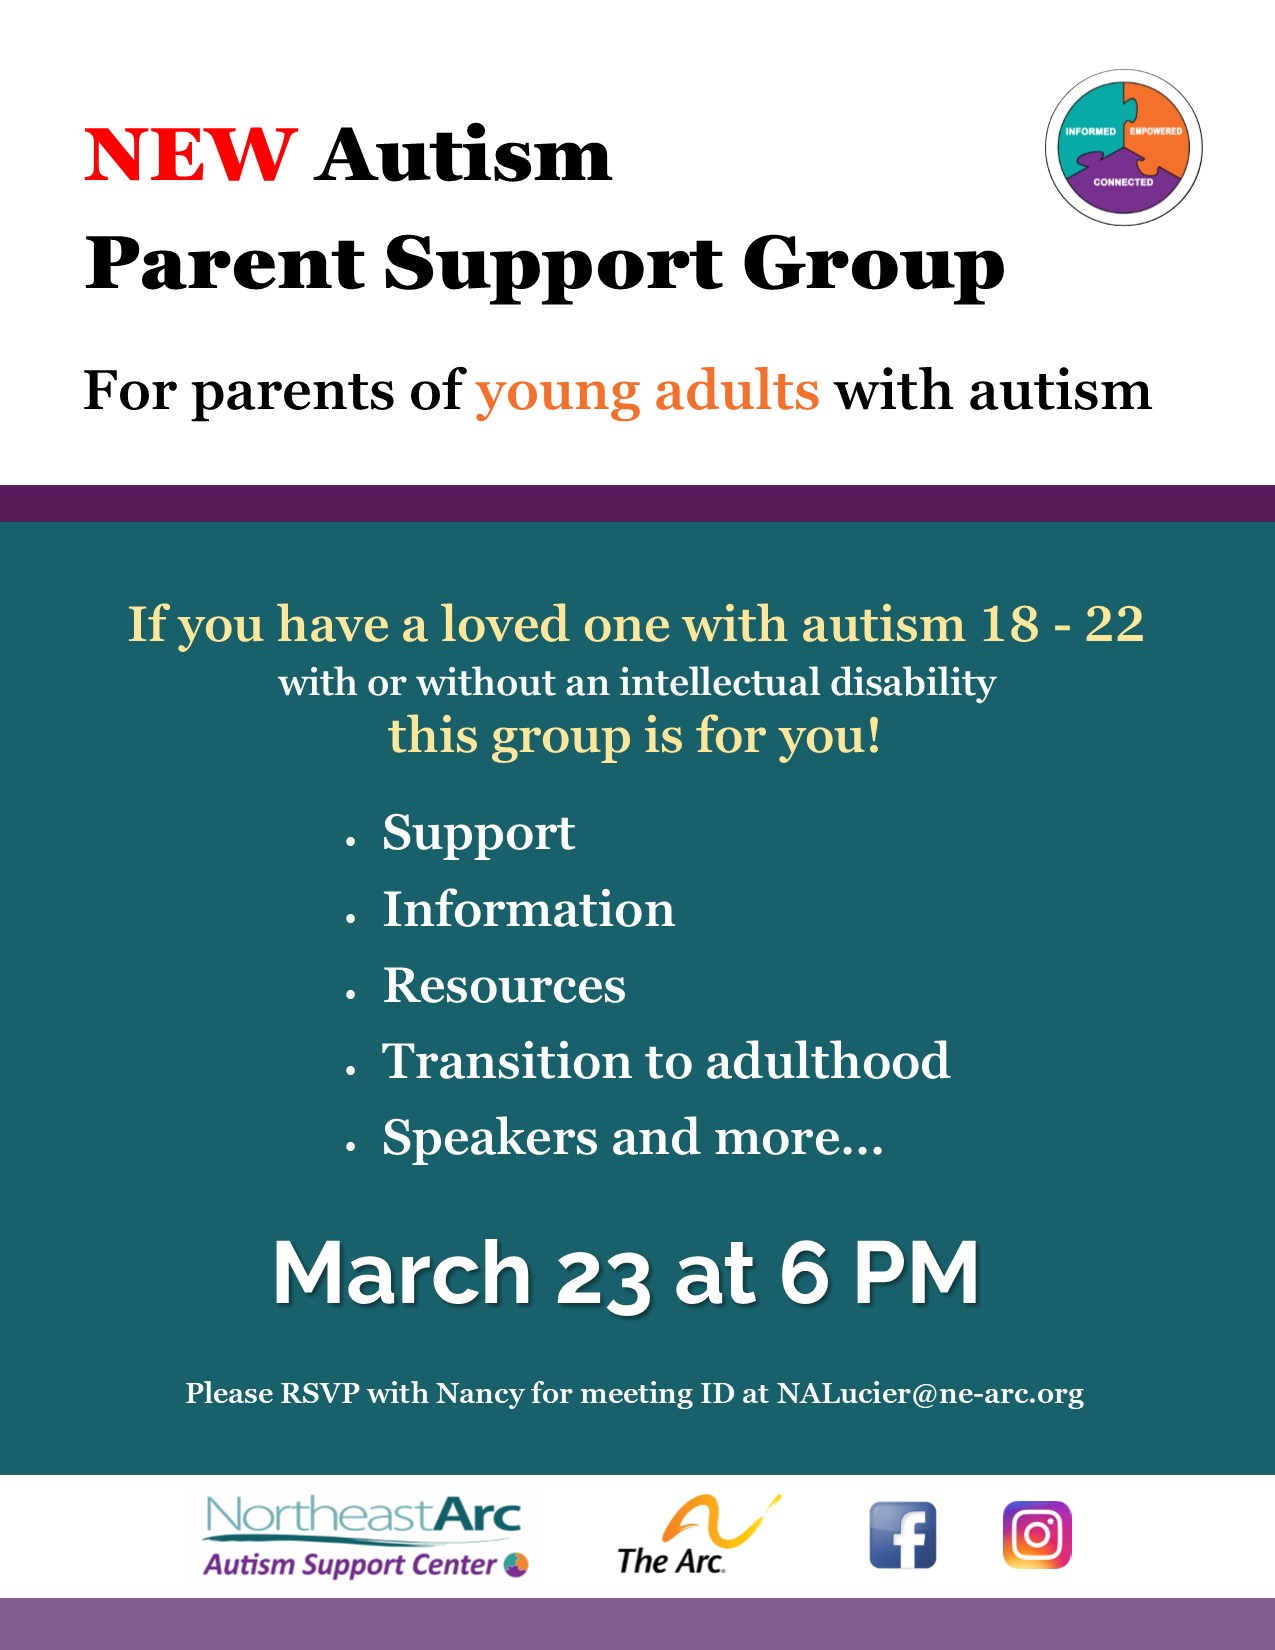 Virtual Support Group for Parents of Young Adults with Autism (18-22 years old)